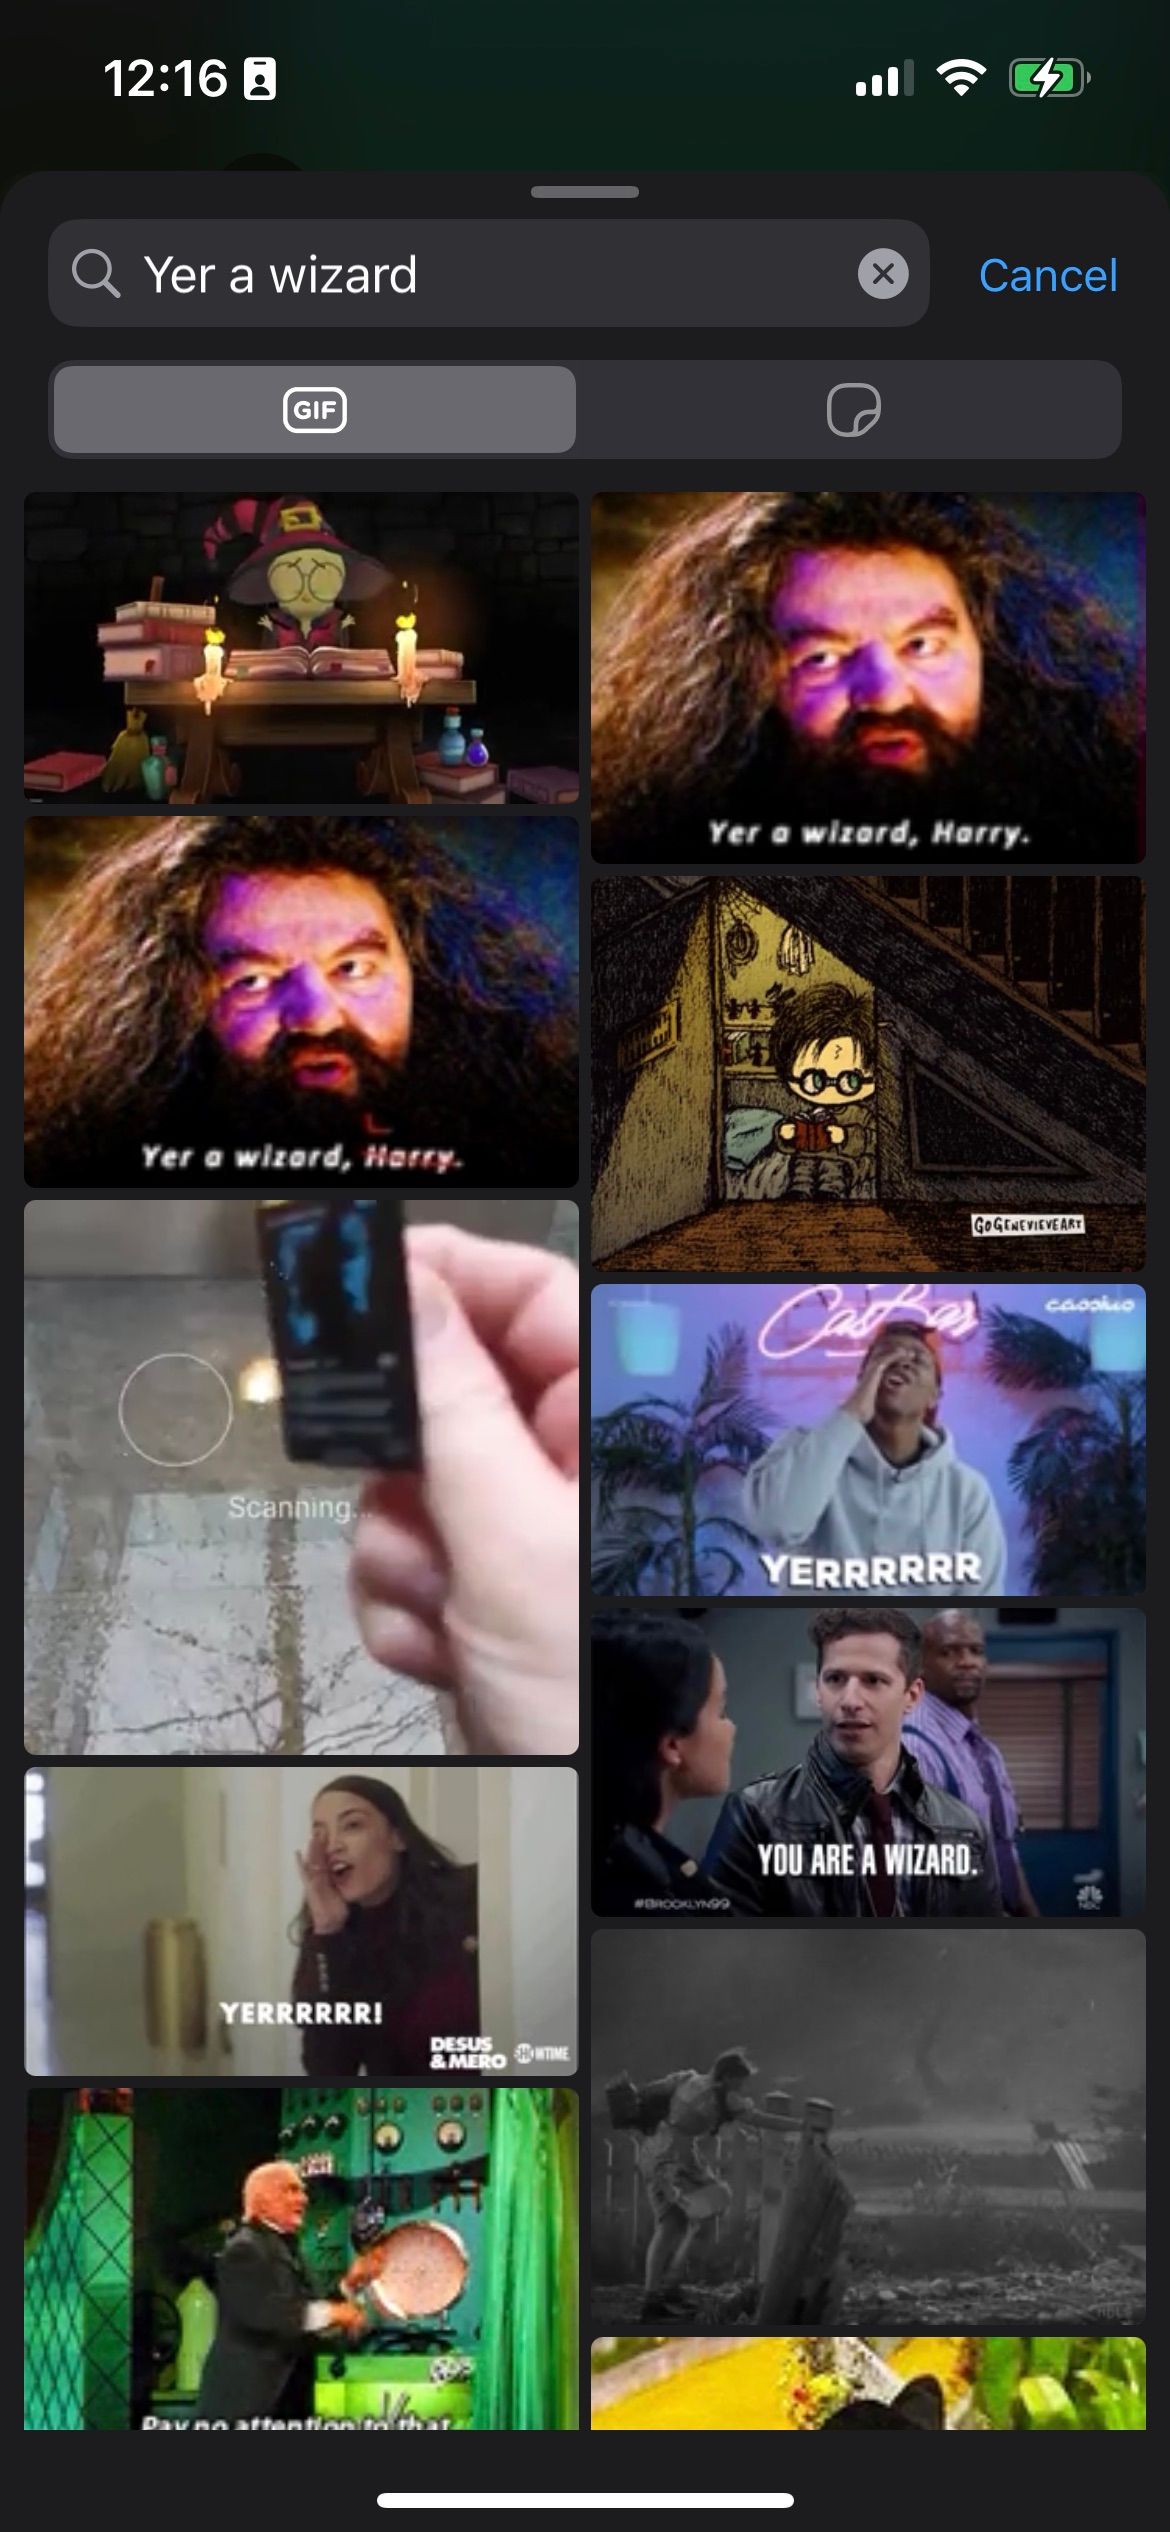 WhatsApp "Yer a Wizard" GIF search results